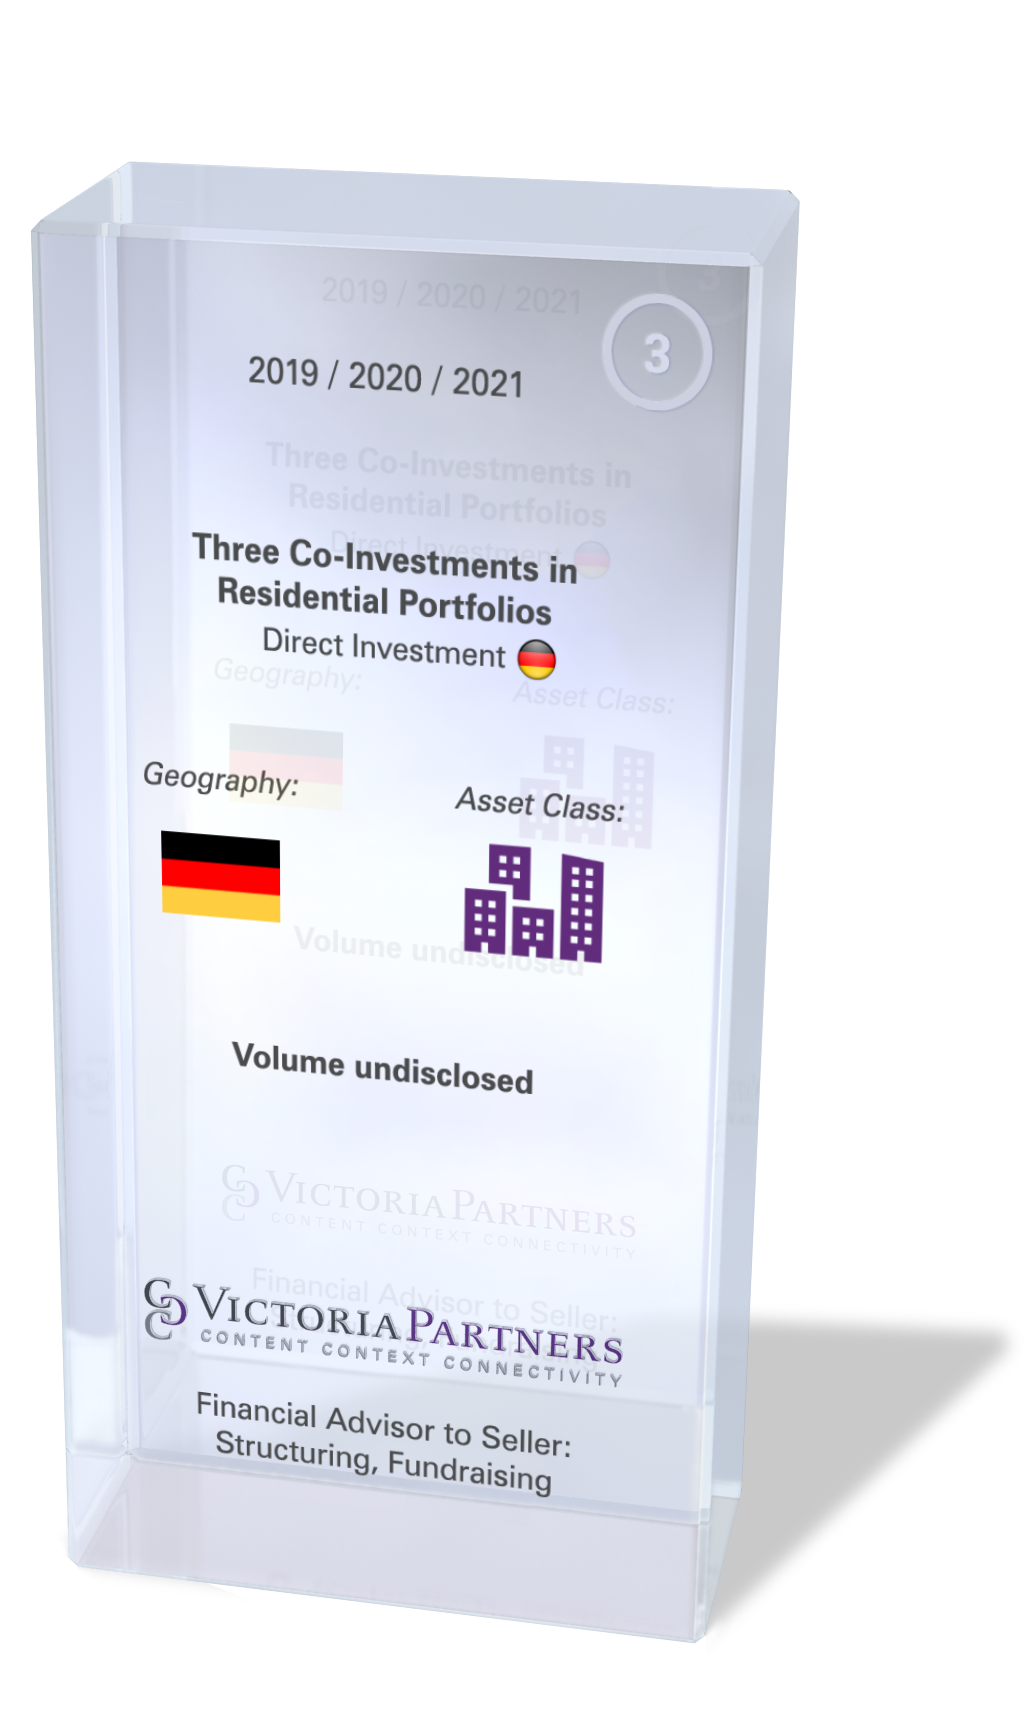 VICTORIAPARTNERS - Financial Advisor to Seller: Structuring, Fundraising in Germany - 2019/2020/2021